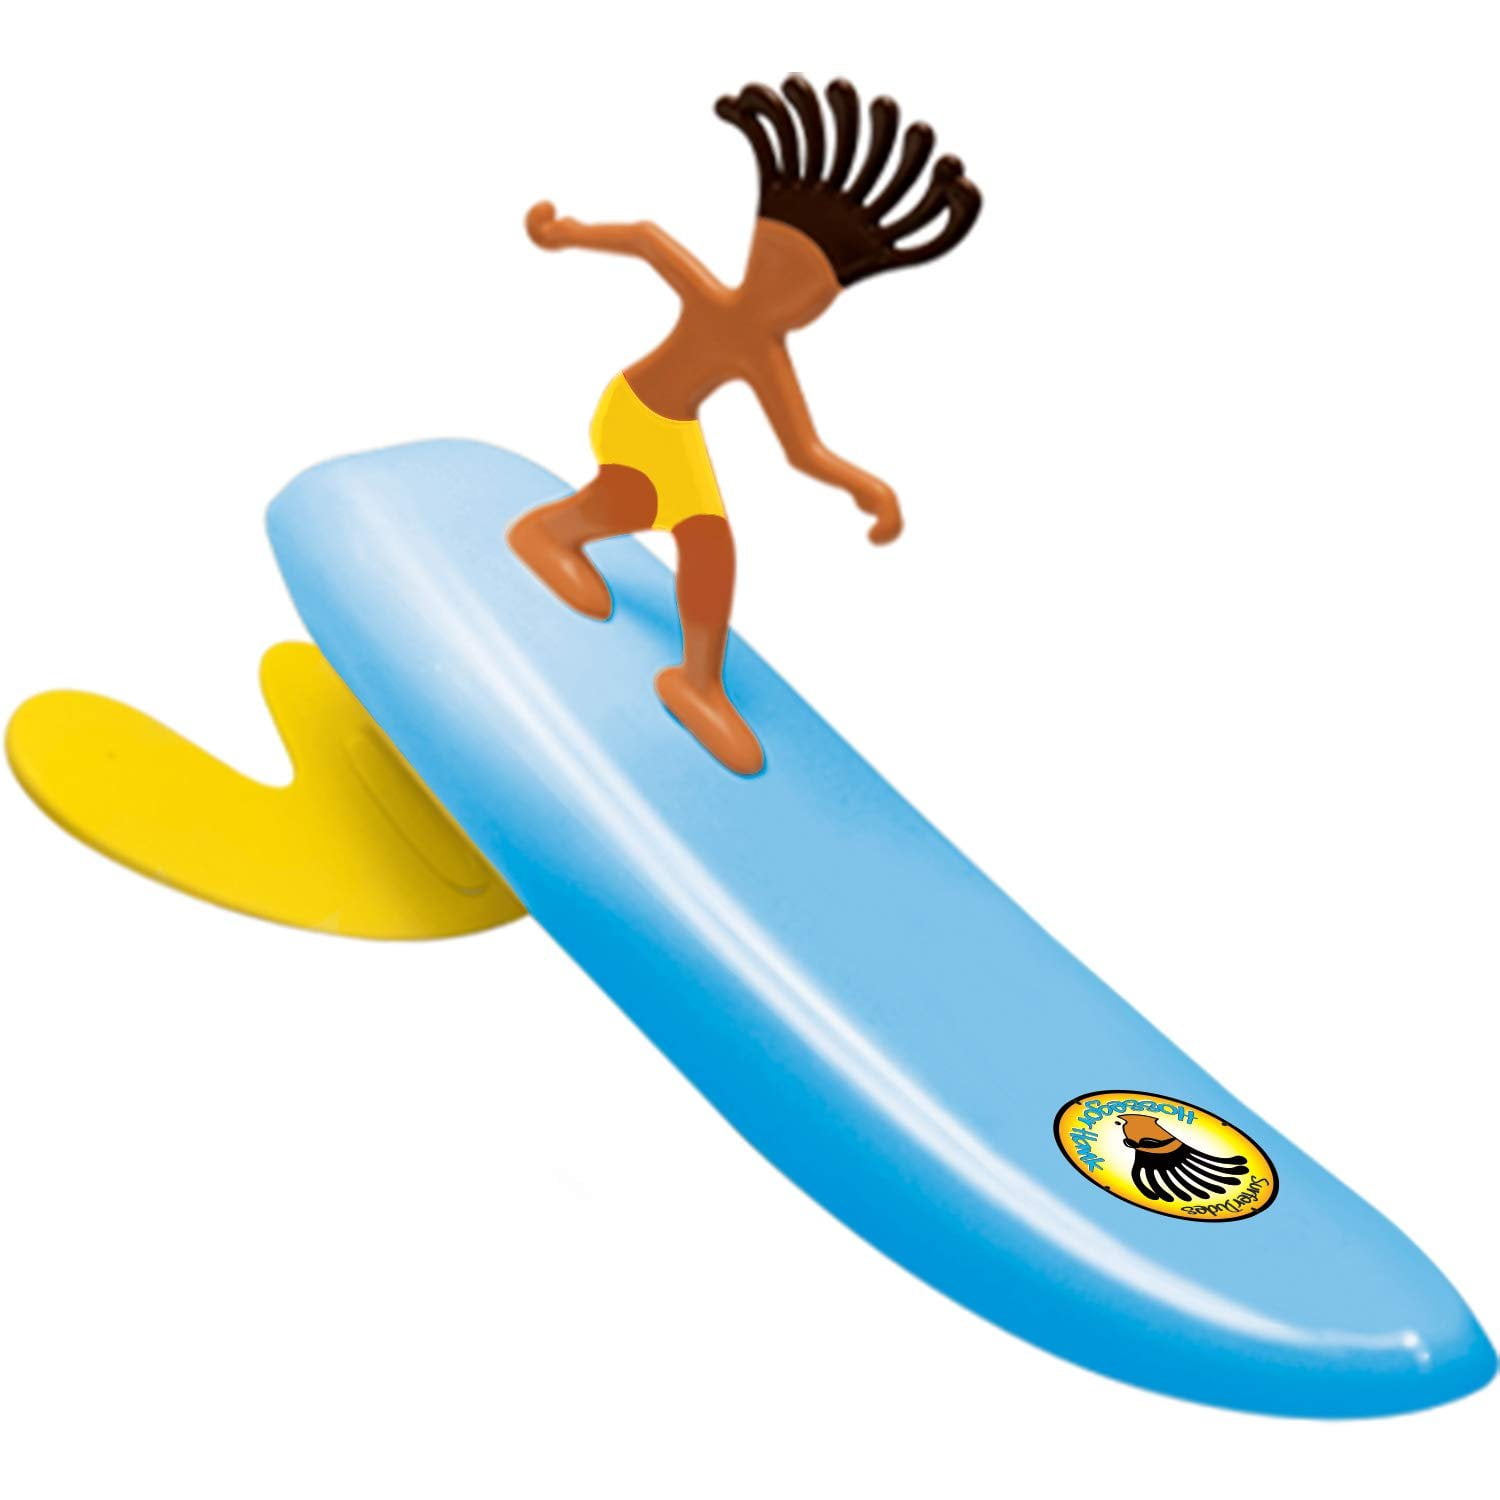 Surfer Dudes Wave Powered Mini-Surfer and Surfboard Toy 